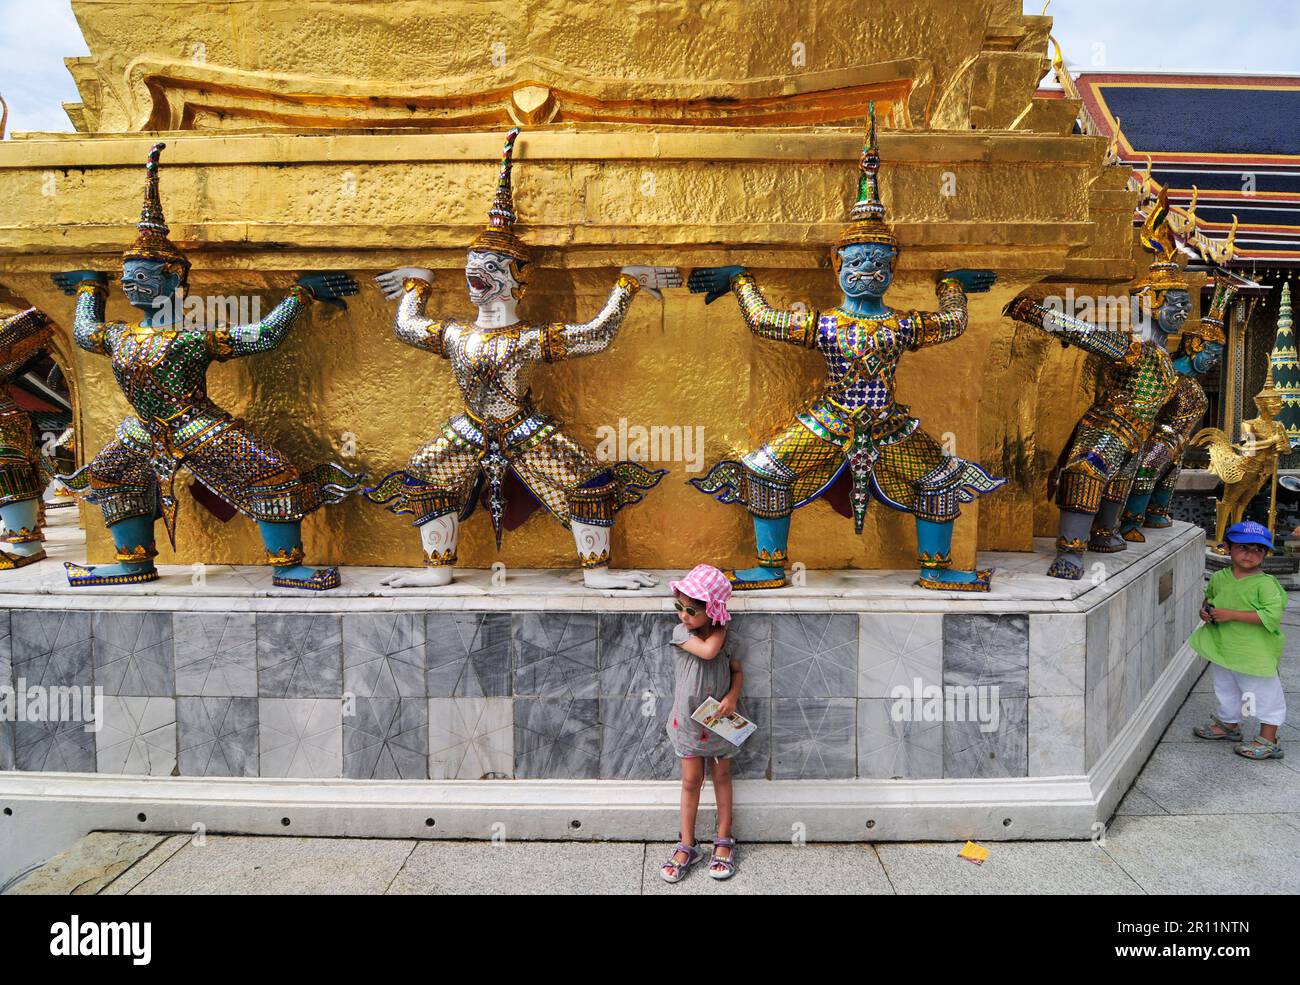 Mythical creatures supporting the golden pagoda at the Grand Palace in Bangkok, Thailand. Stock Photo